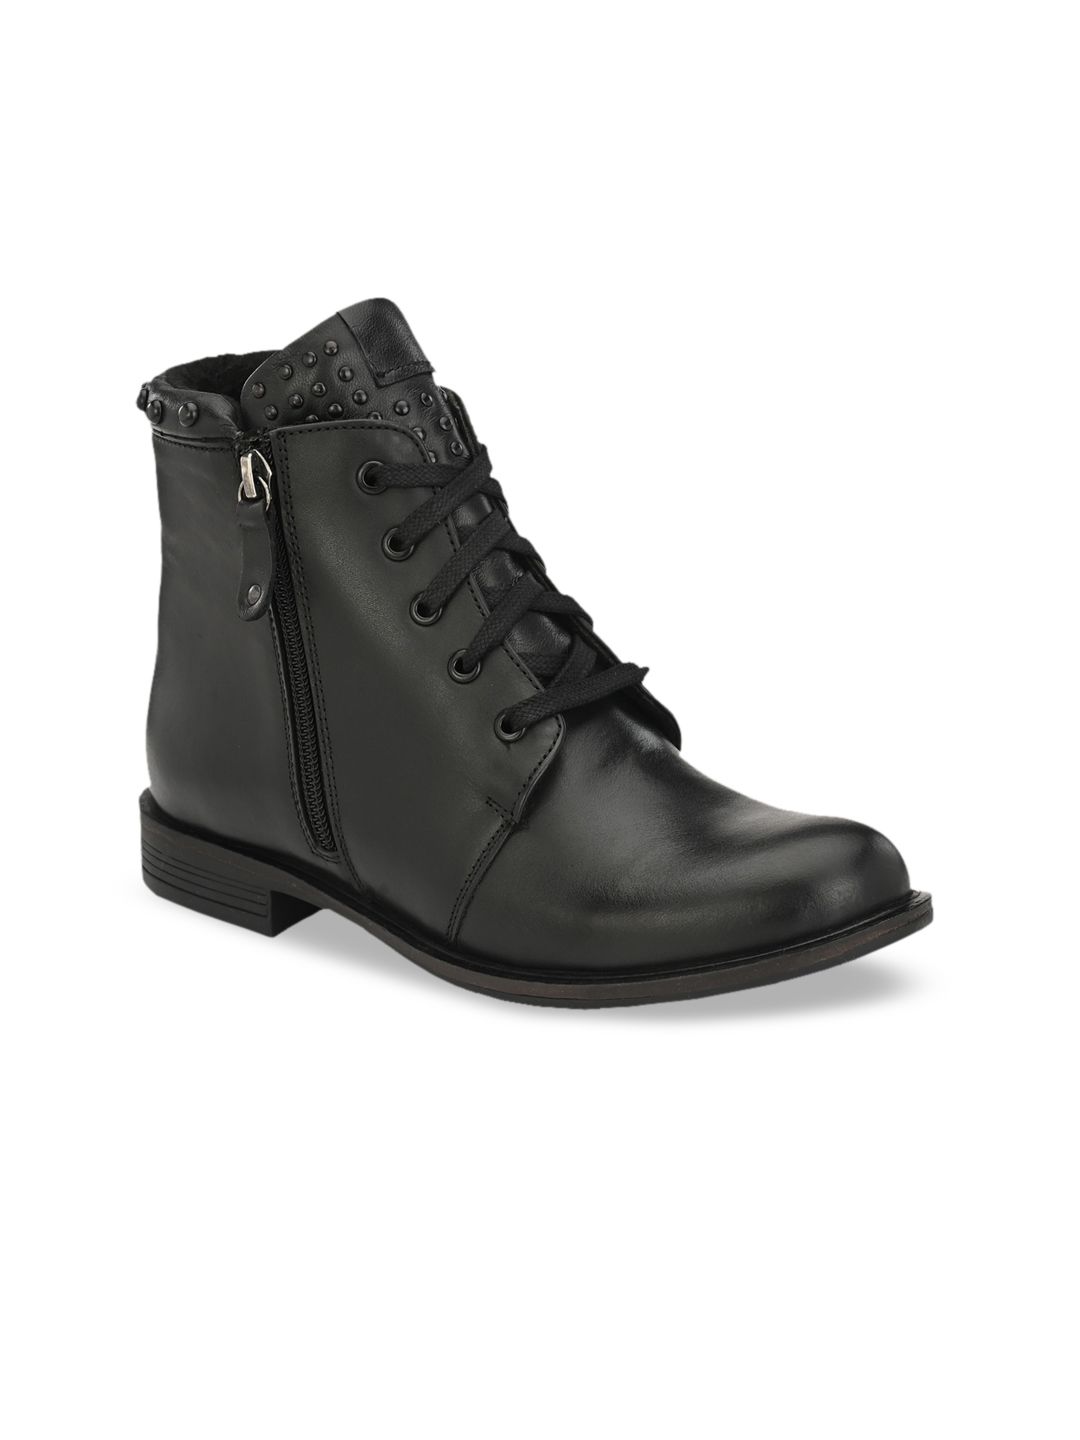 Delize Women Black Solid Mid-Top Flat Boots Price in India